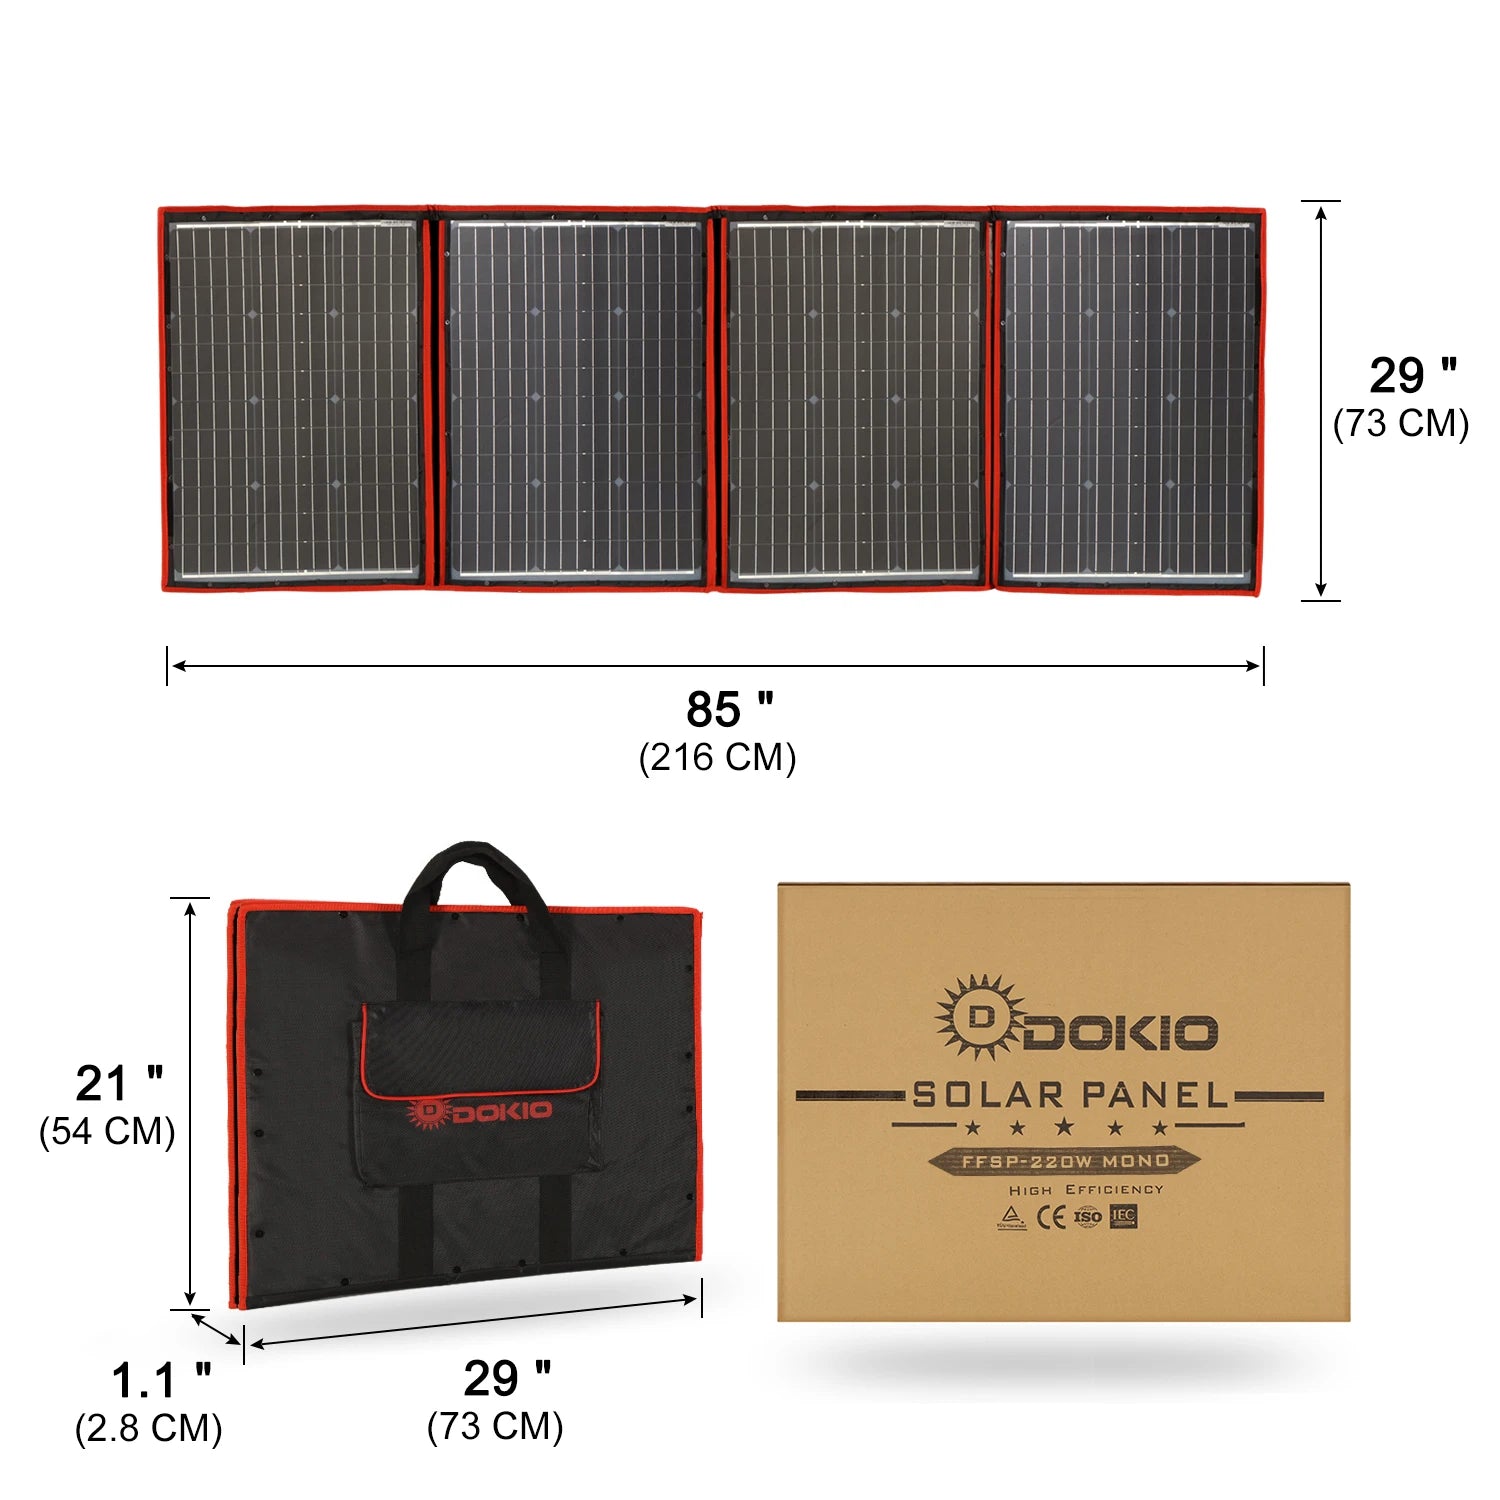 Dokio Flexible Foldable Solar Panel, Flexible, foldable solar panel kit for travel, phone, and boat use, with high efficiency and adjustable power options.